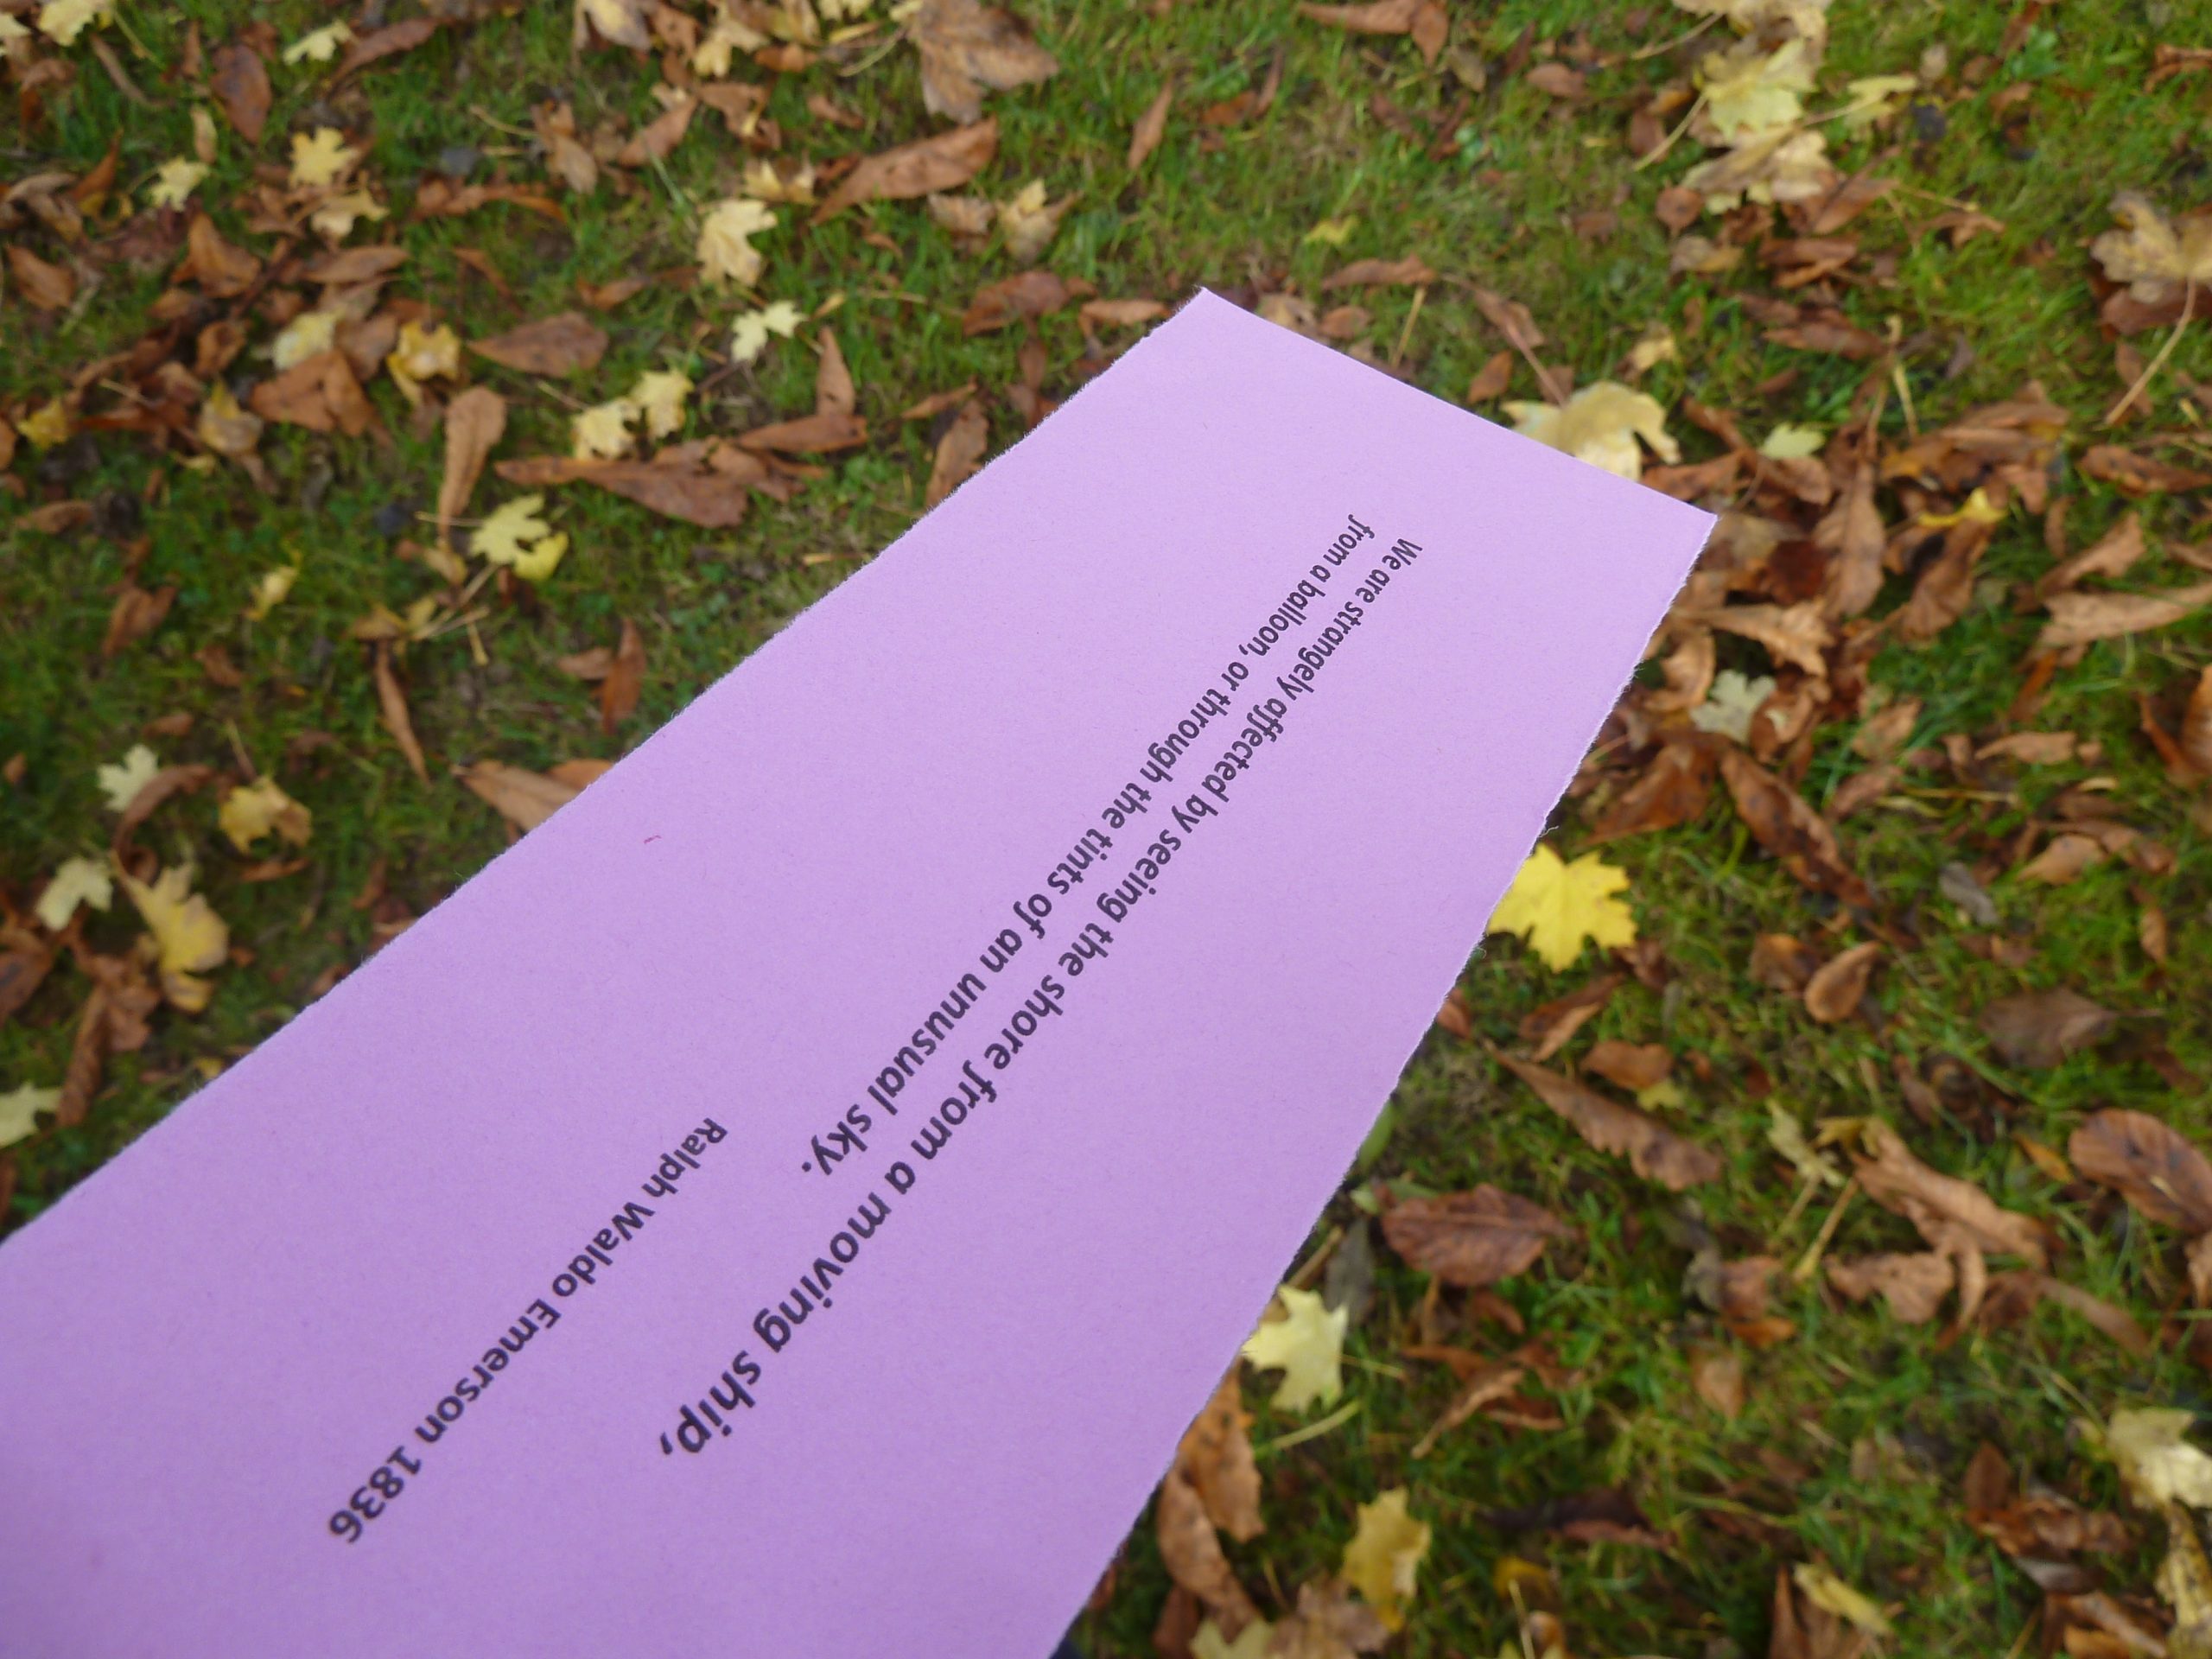 A poem printed on a piece of paper laying on grass covered by leaves